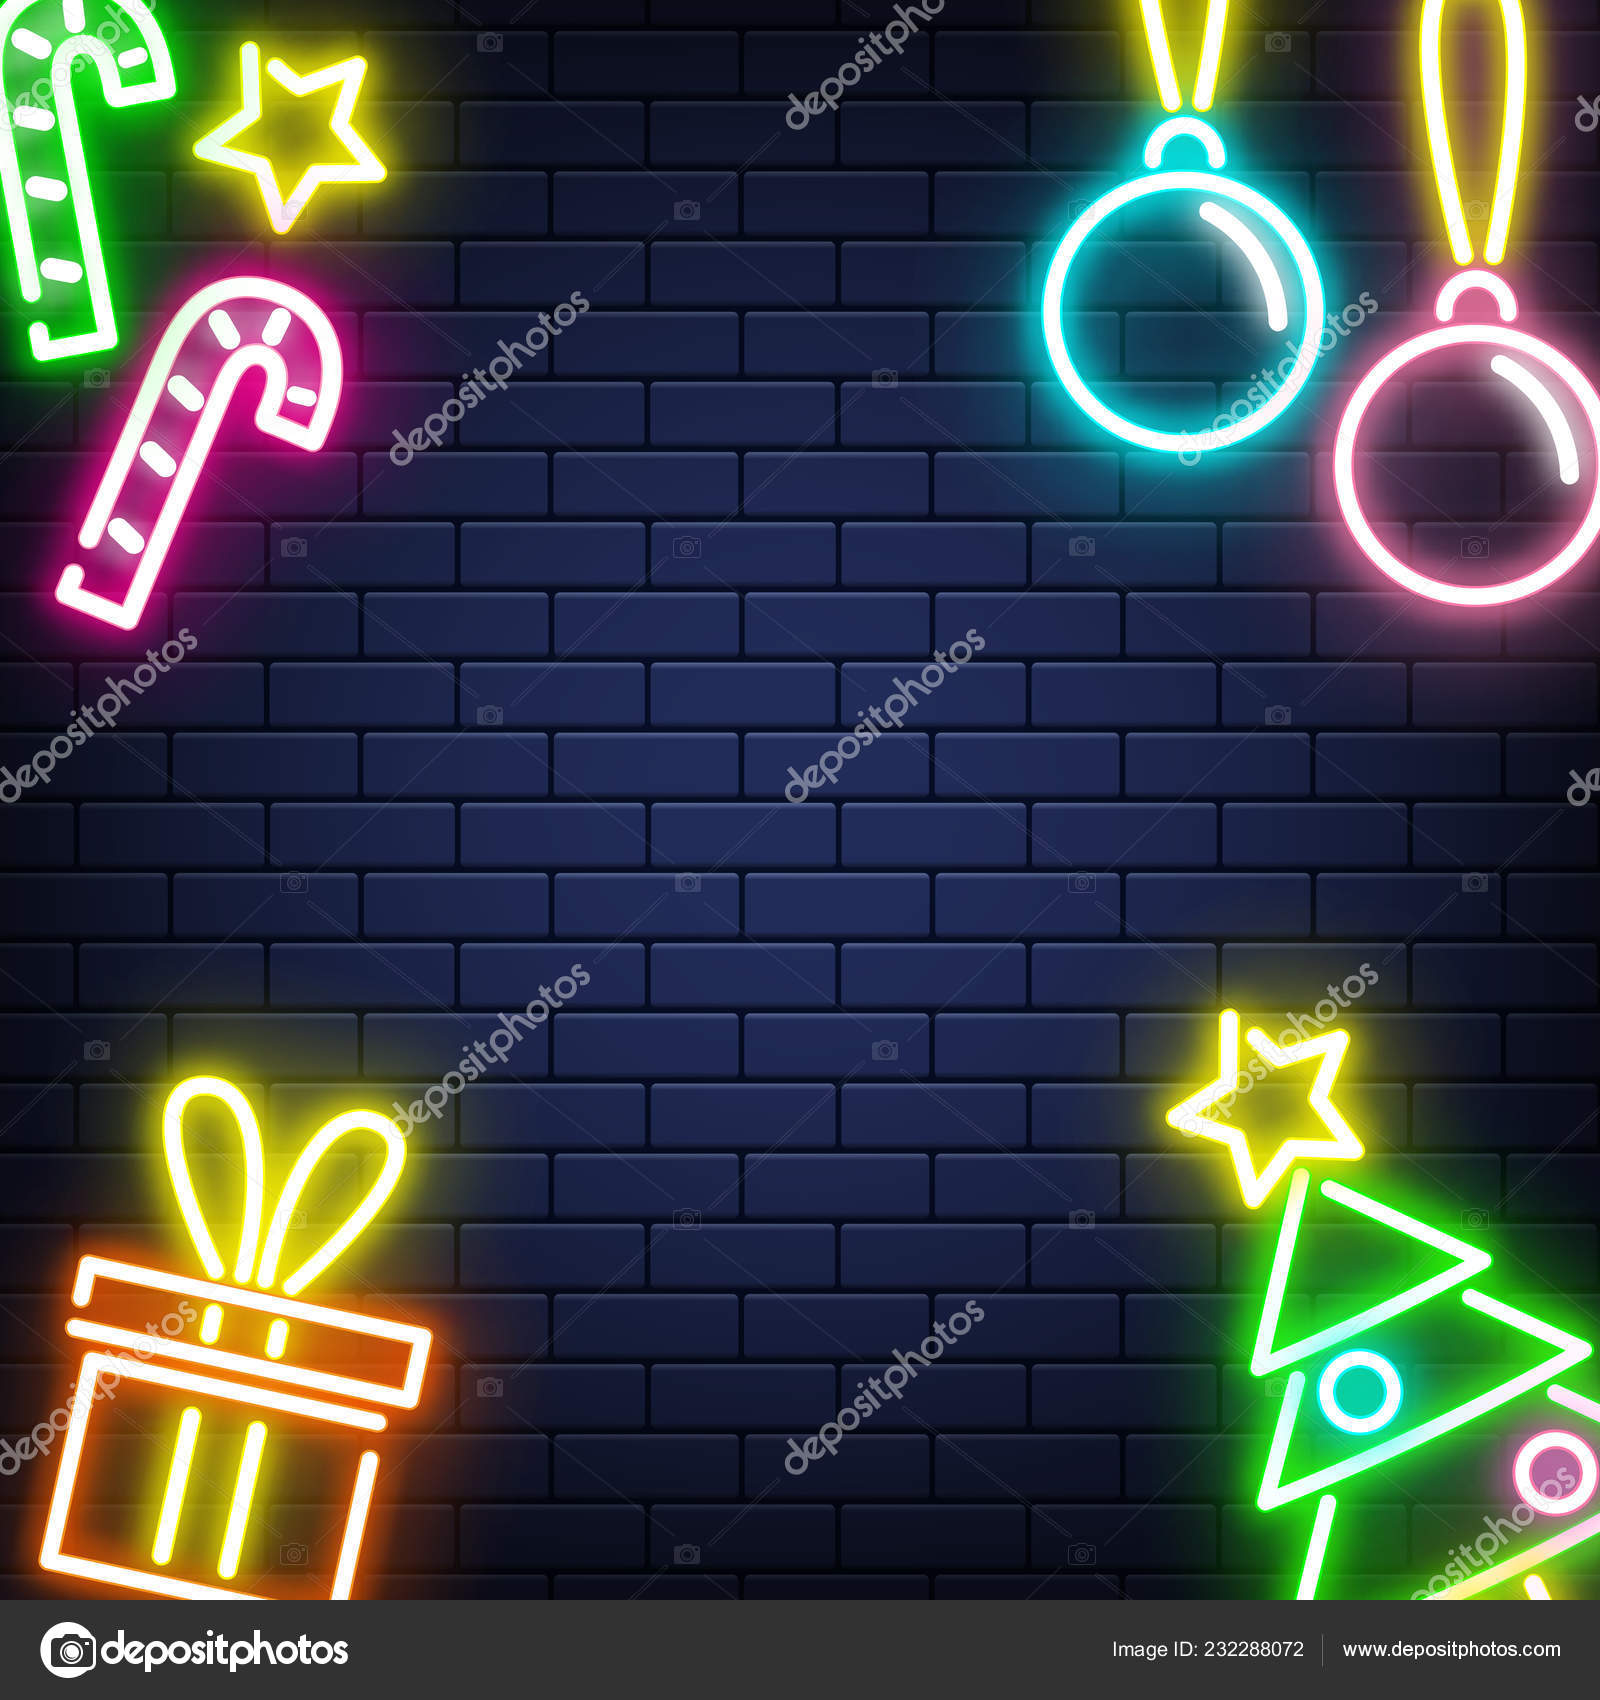 Christmas bells neon icon on light background Vector Image